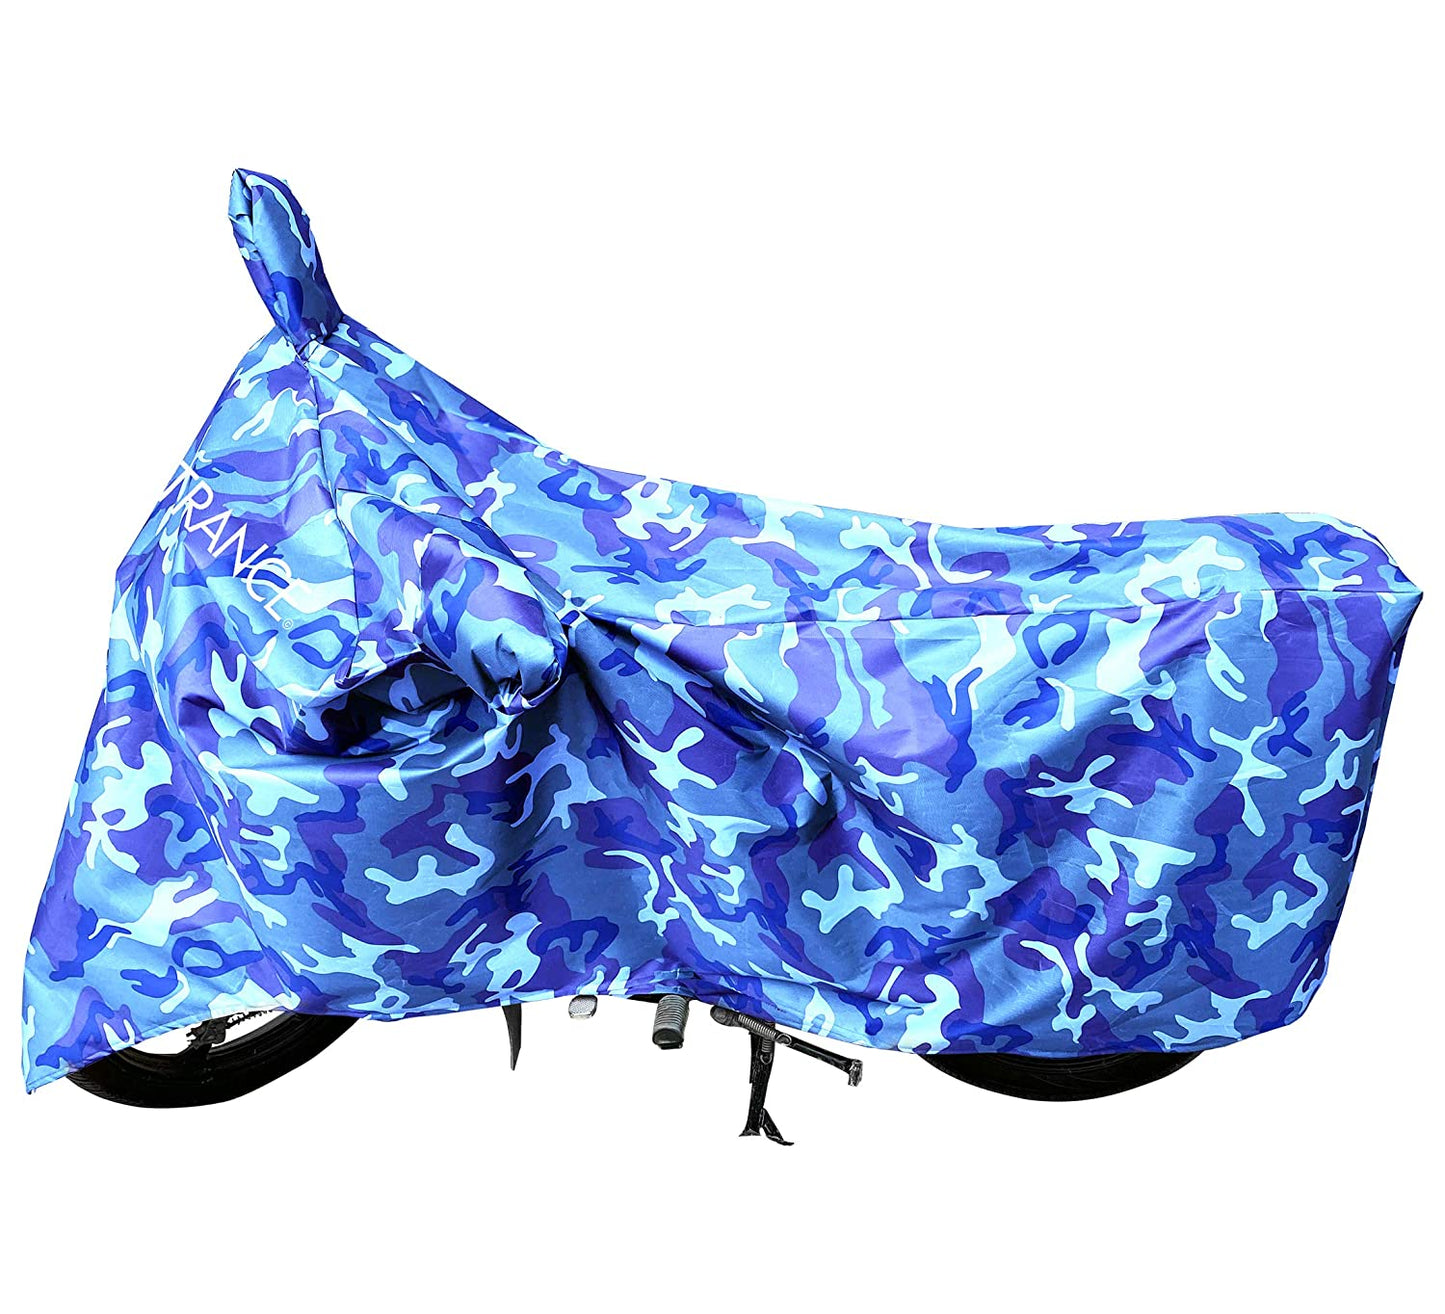 MotoTrance Jungle Bike Body Covers For Mahindra Centuro Rockstar - Interlock-Stitched Waterproof and Heat Resistant with Mirror Pockets